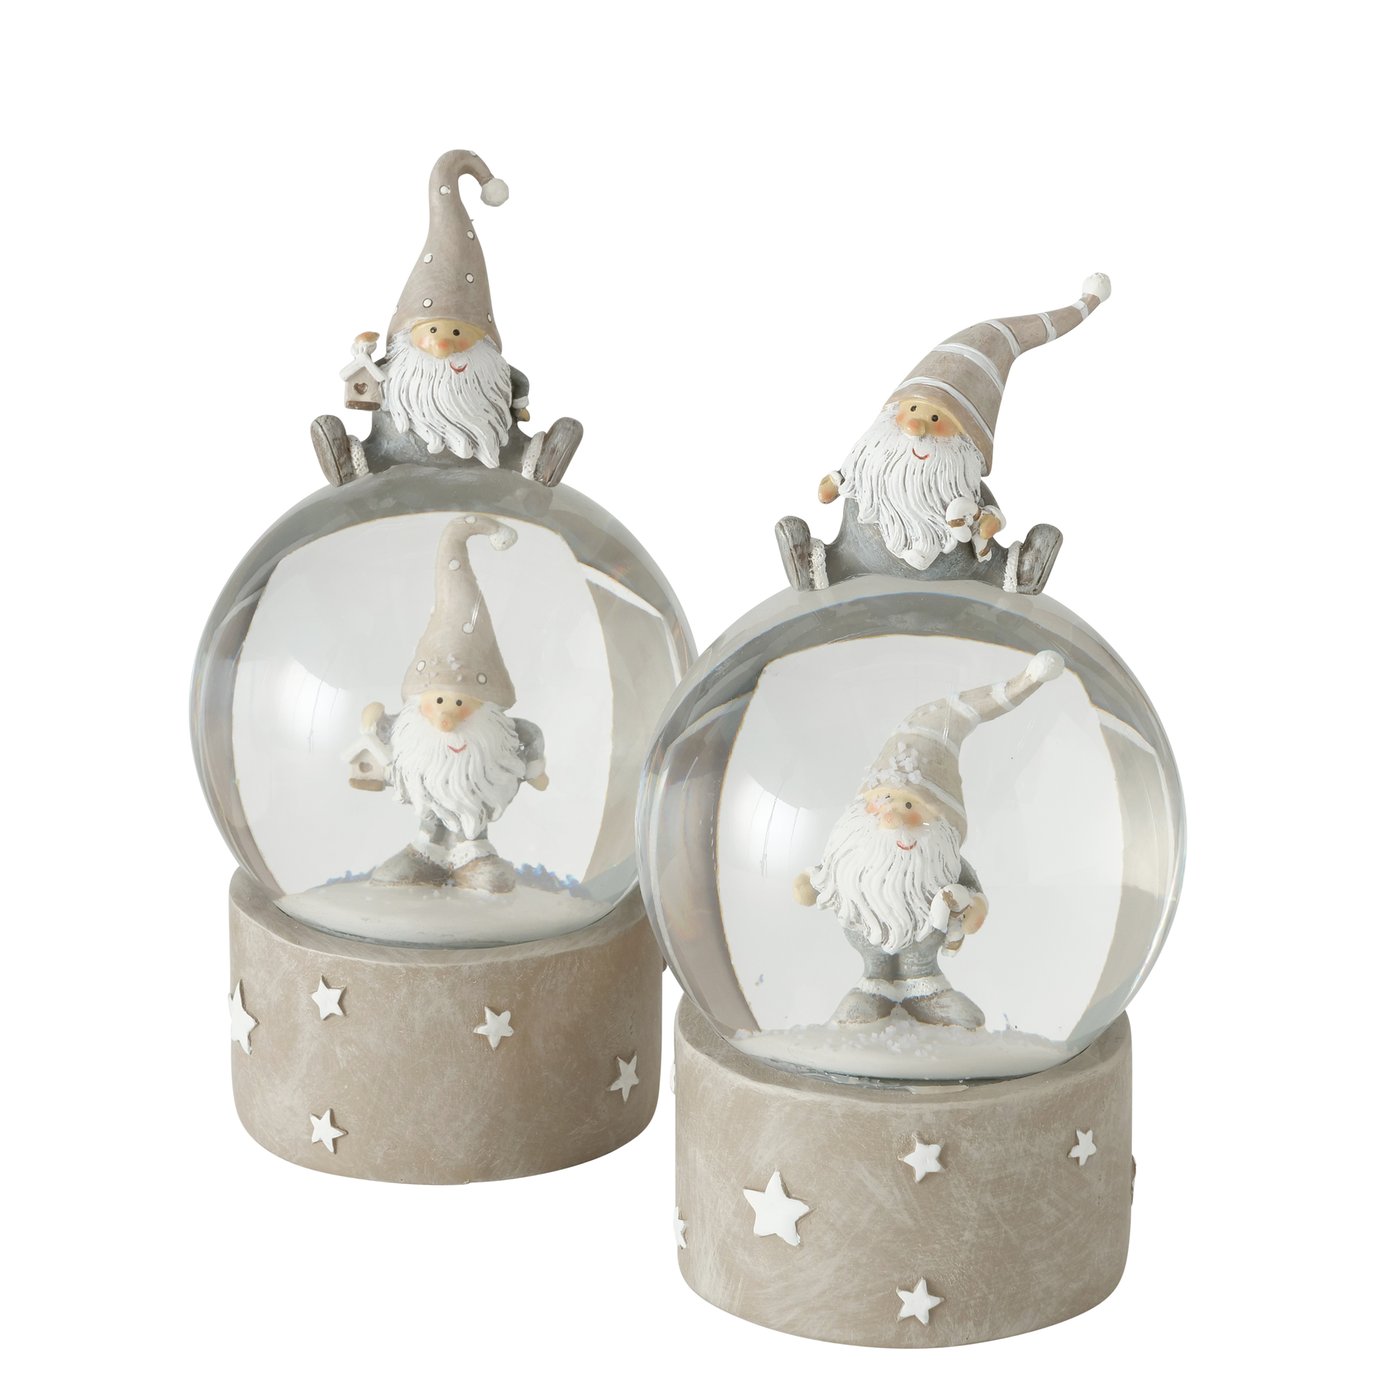 &Quirky Christmas Gonk Snowglobe : Striped Hat or Dotty Hat